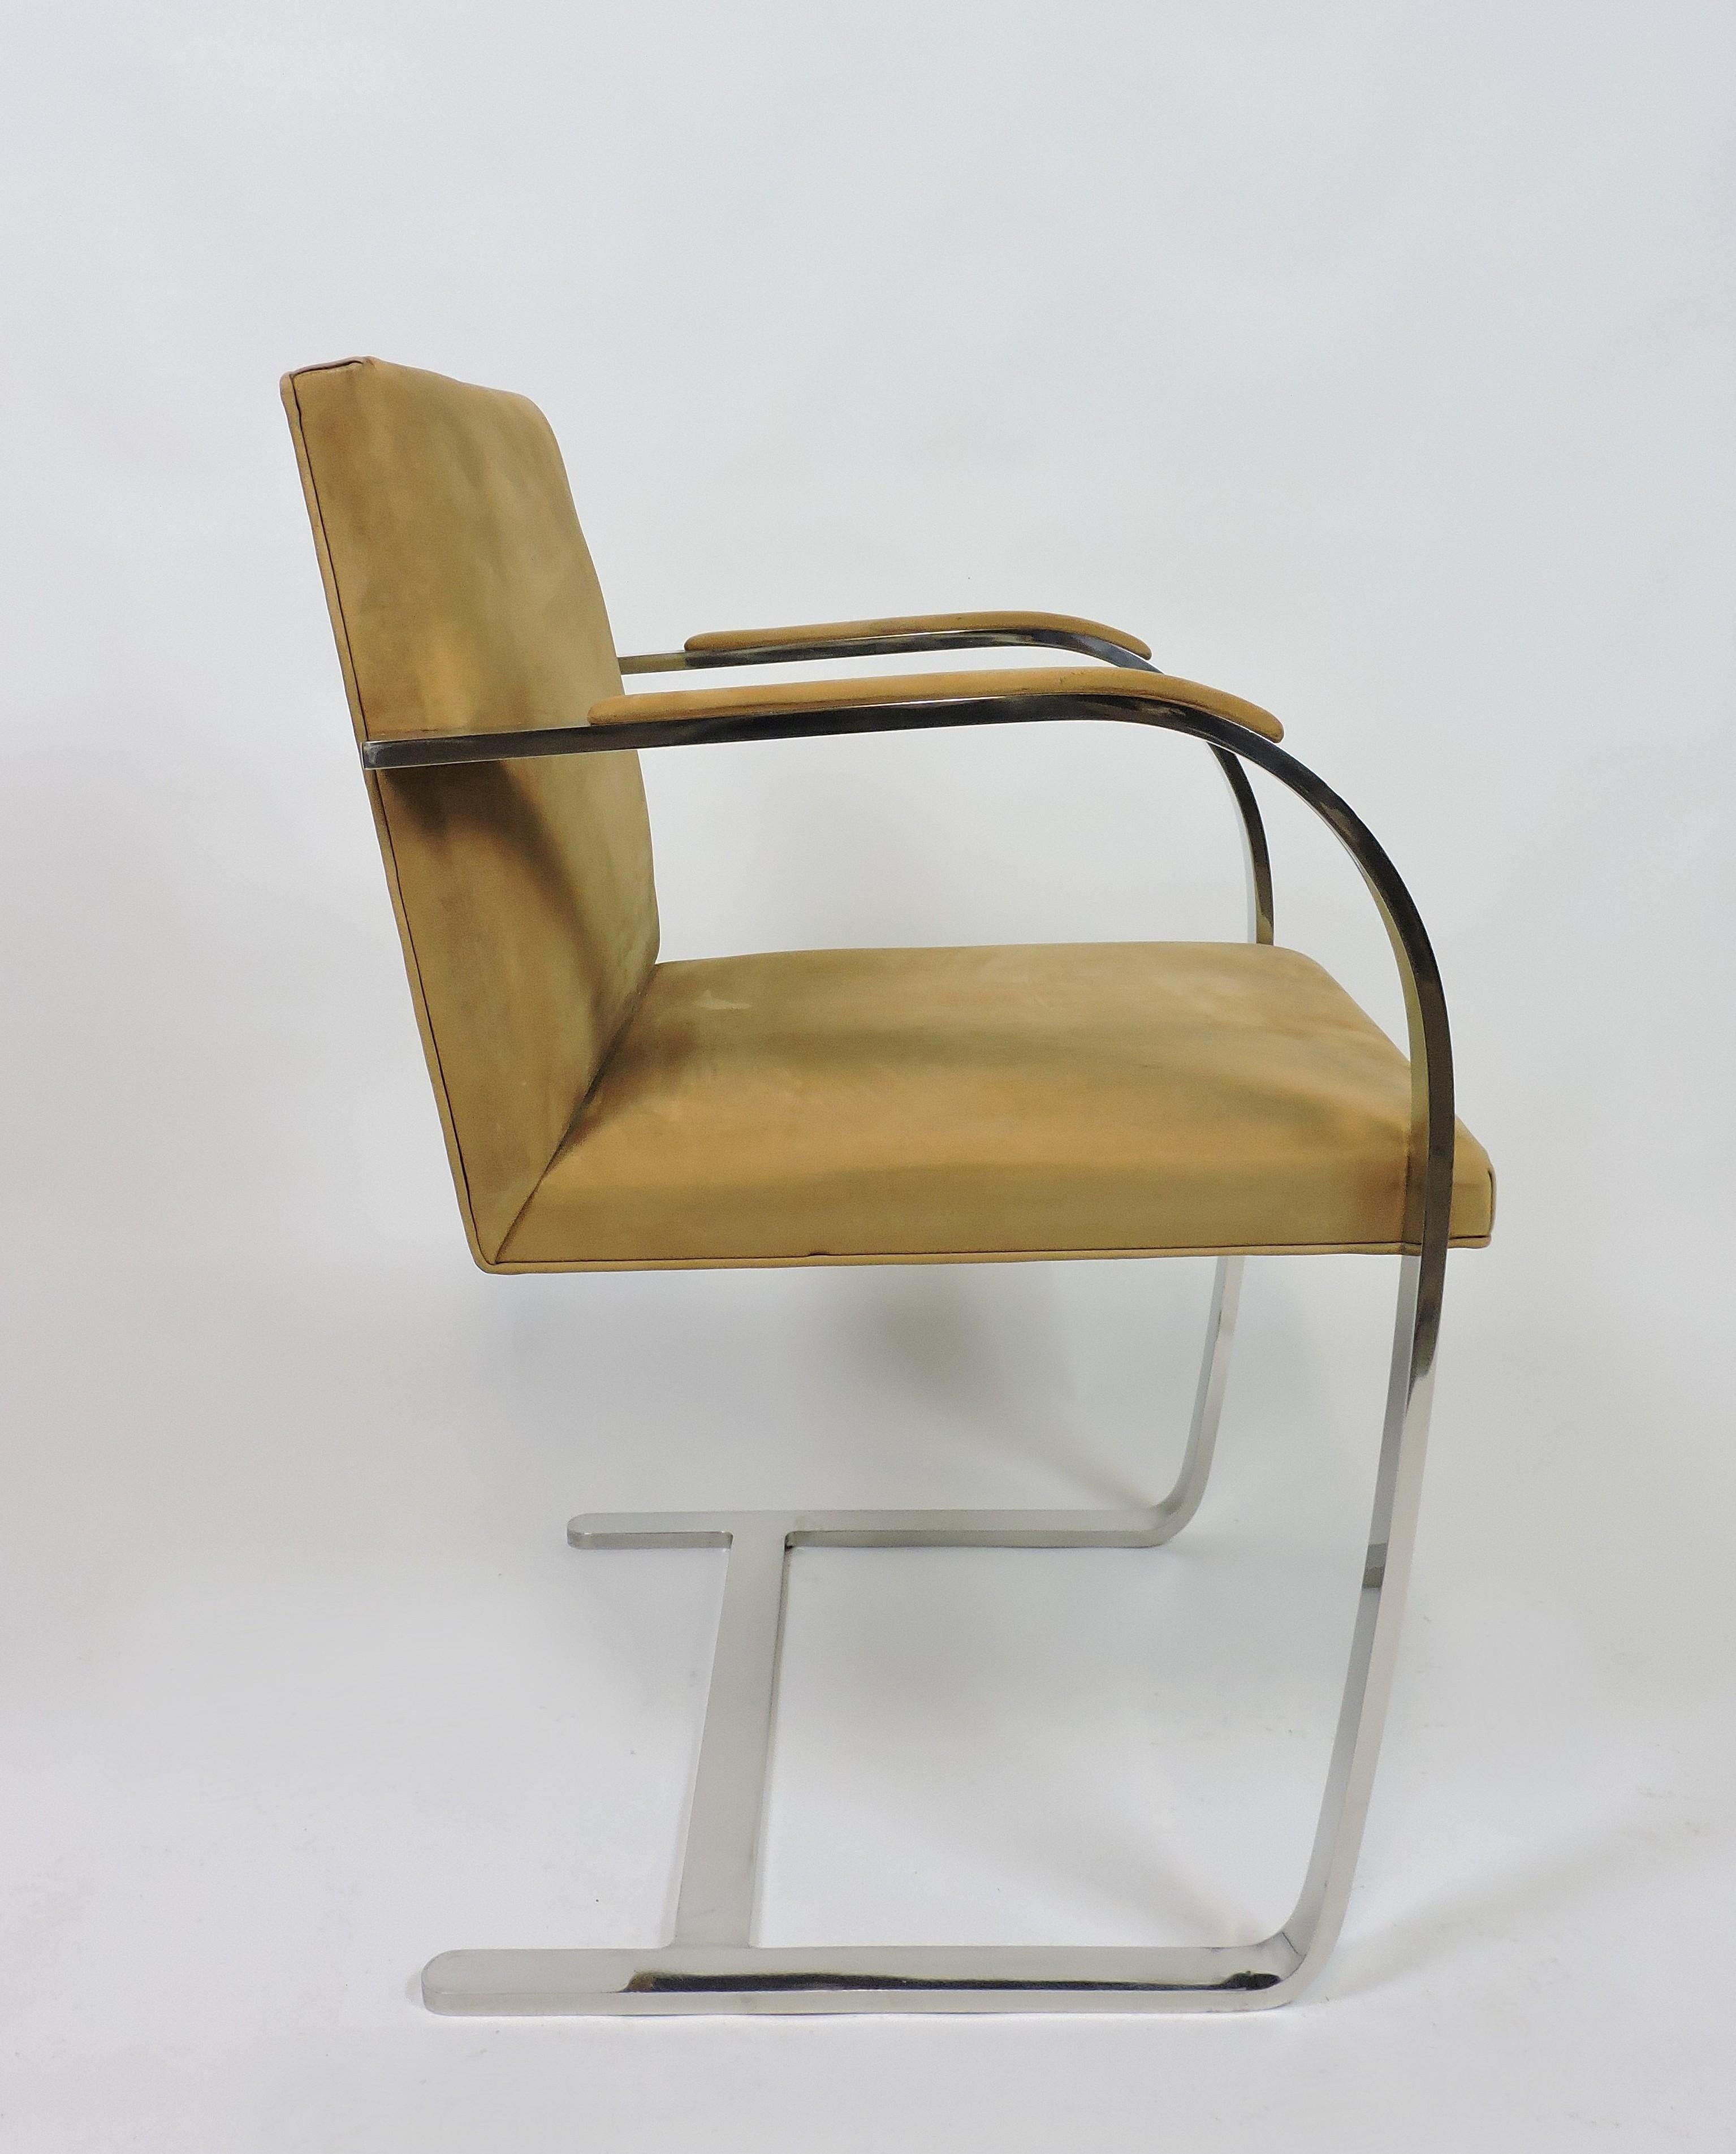 Classic Brno chair designed by Ludwig Mies van der Rohe in 1930 and manufactured in 1977 by Knoll. Simple and elegant cantilevered design that will never go out of style. This chair frame is made of the more expensive solid polished stainless steel,